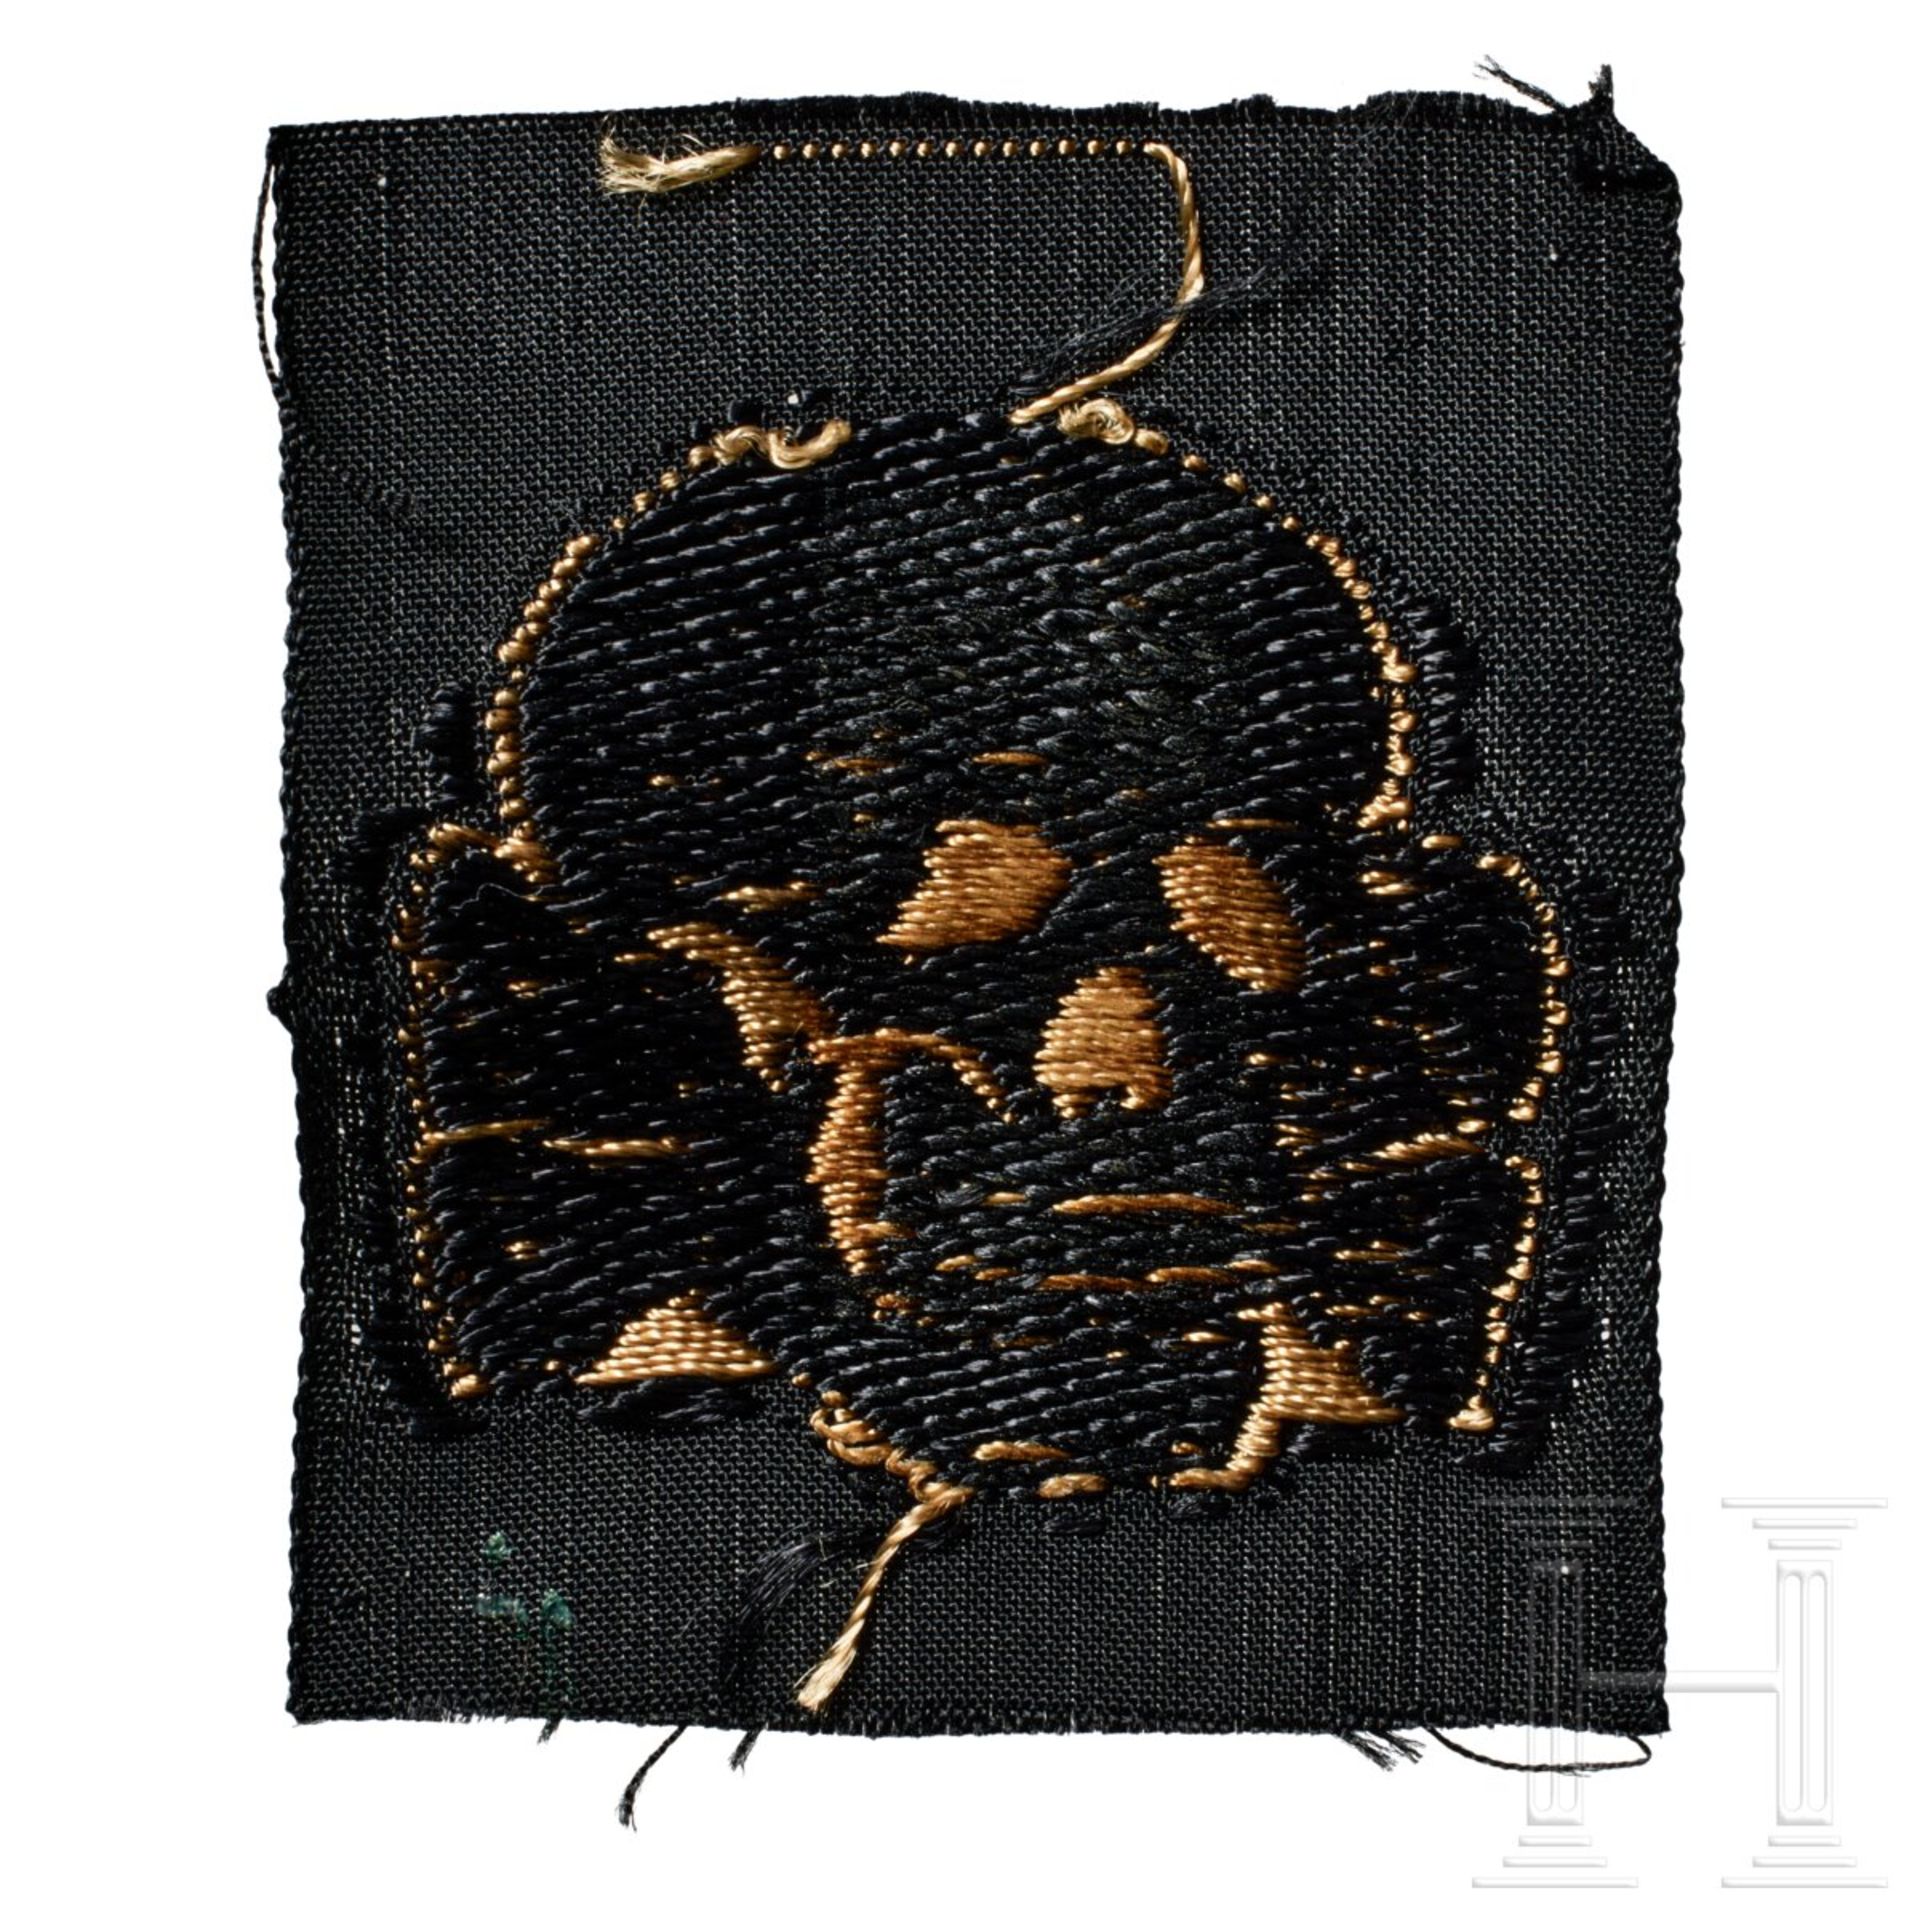 A Tropical Cloth Cap Skull for Enlisted/NCO - Image 2 of 2